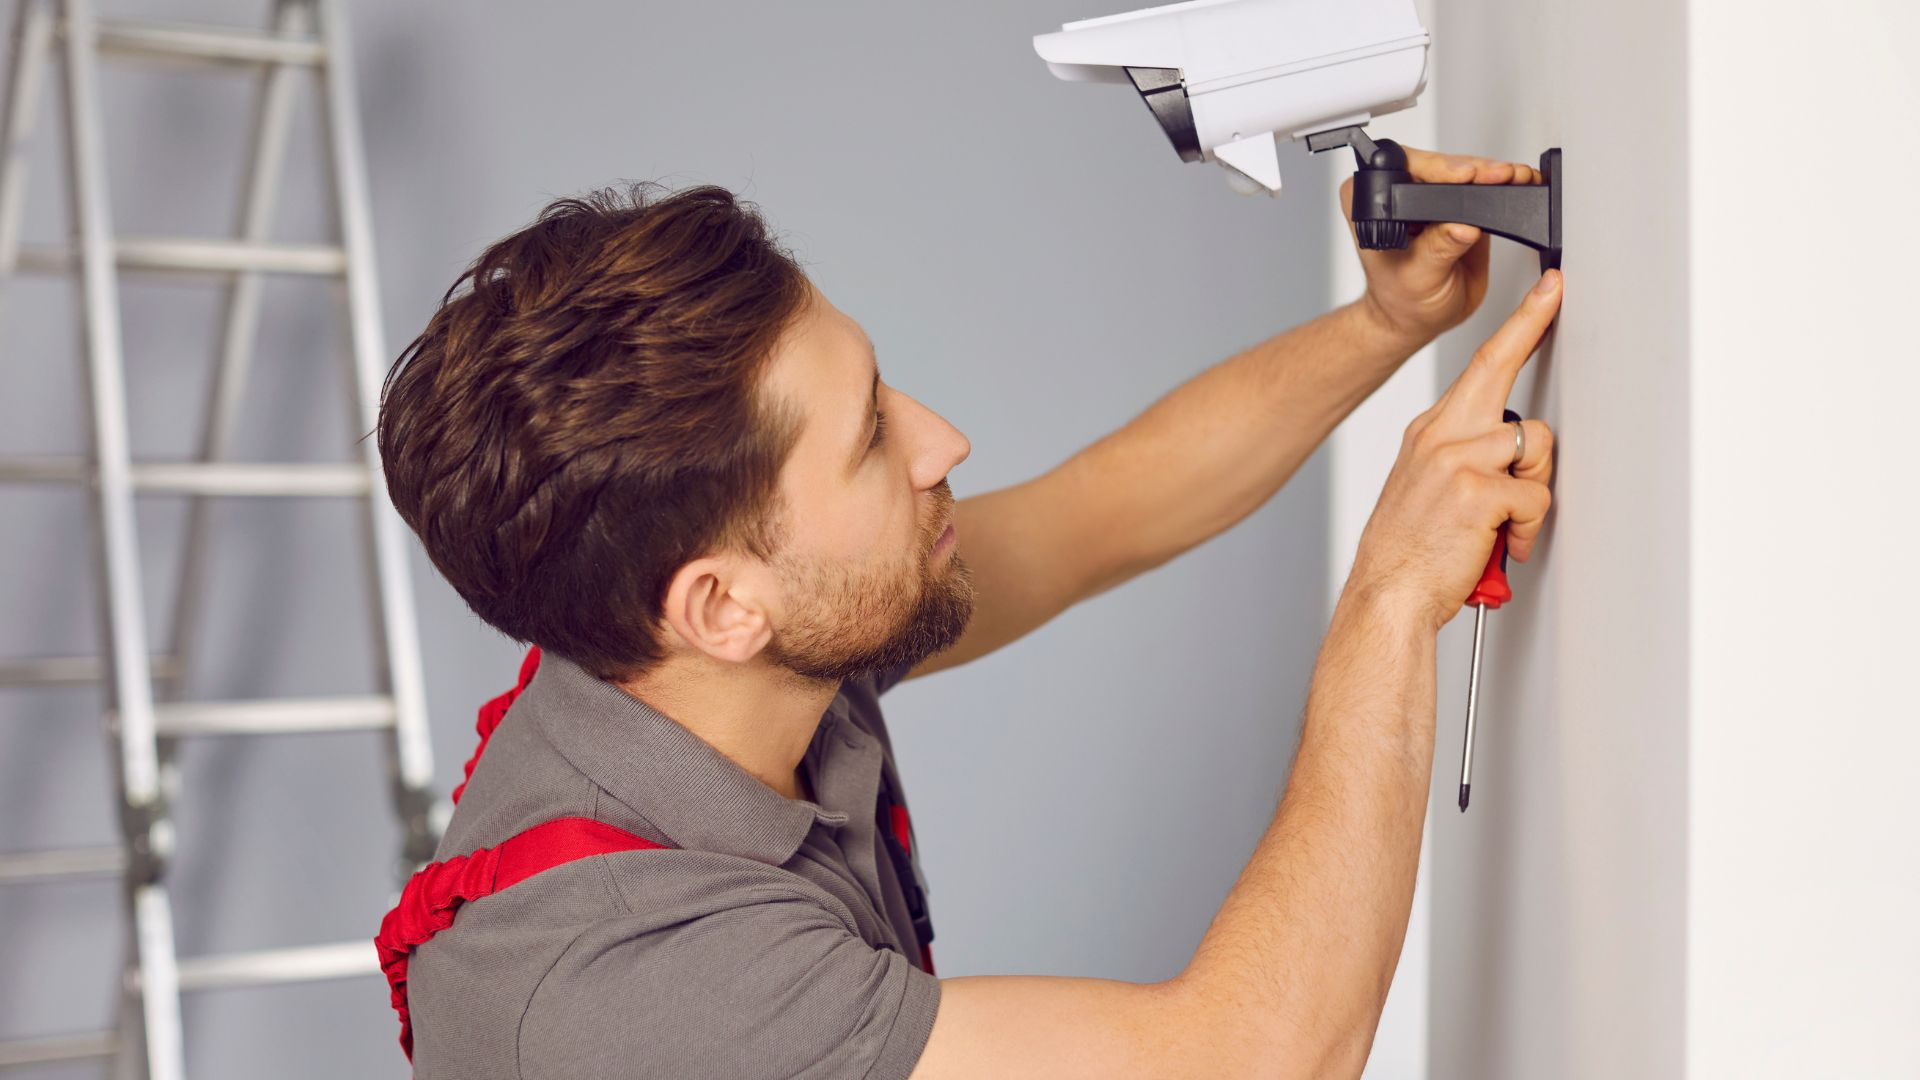 Advantages of Security Camera Installation: Electrical Services for Enhanced Surveillance